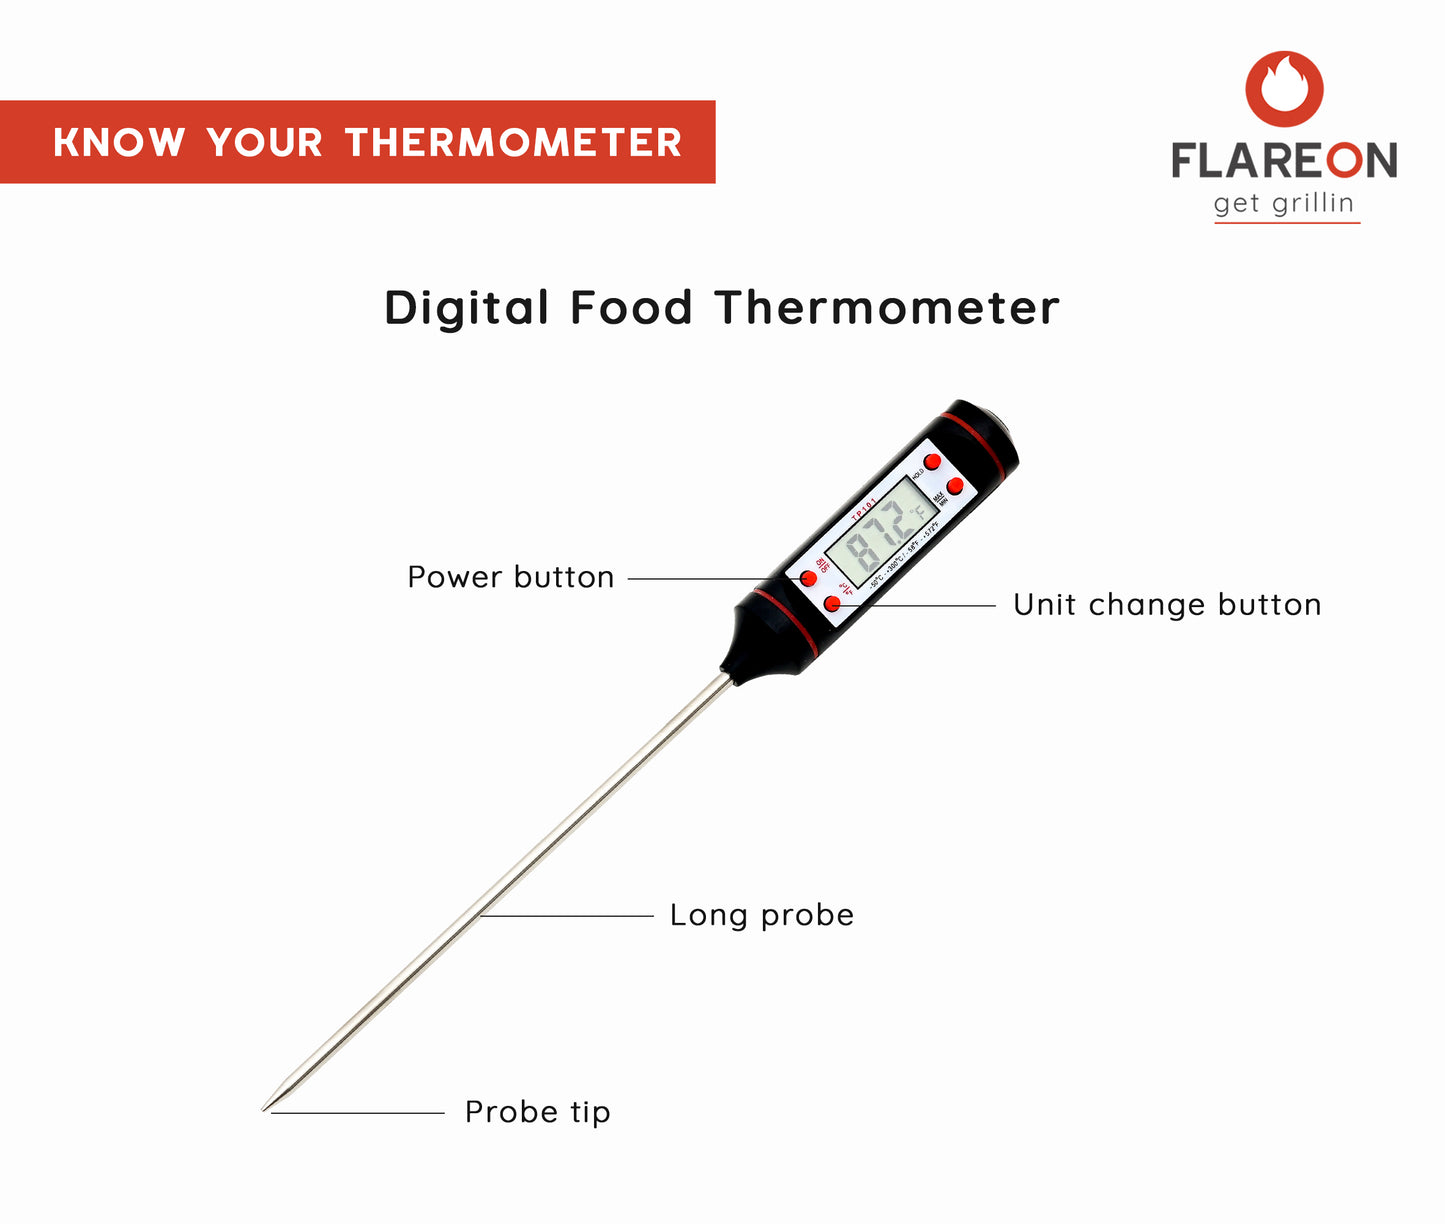 Digital Food Thermometer- Know Your Thermometer